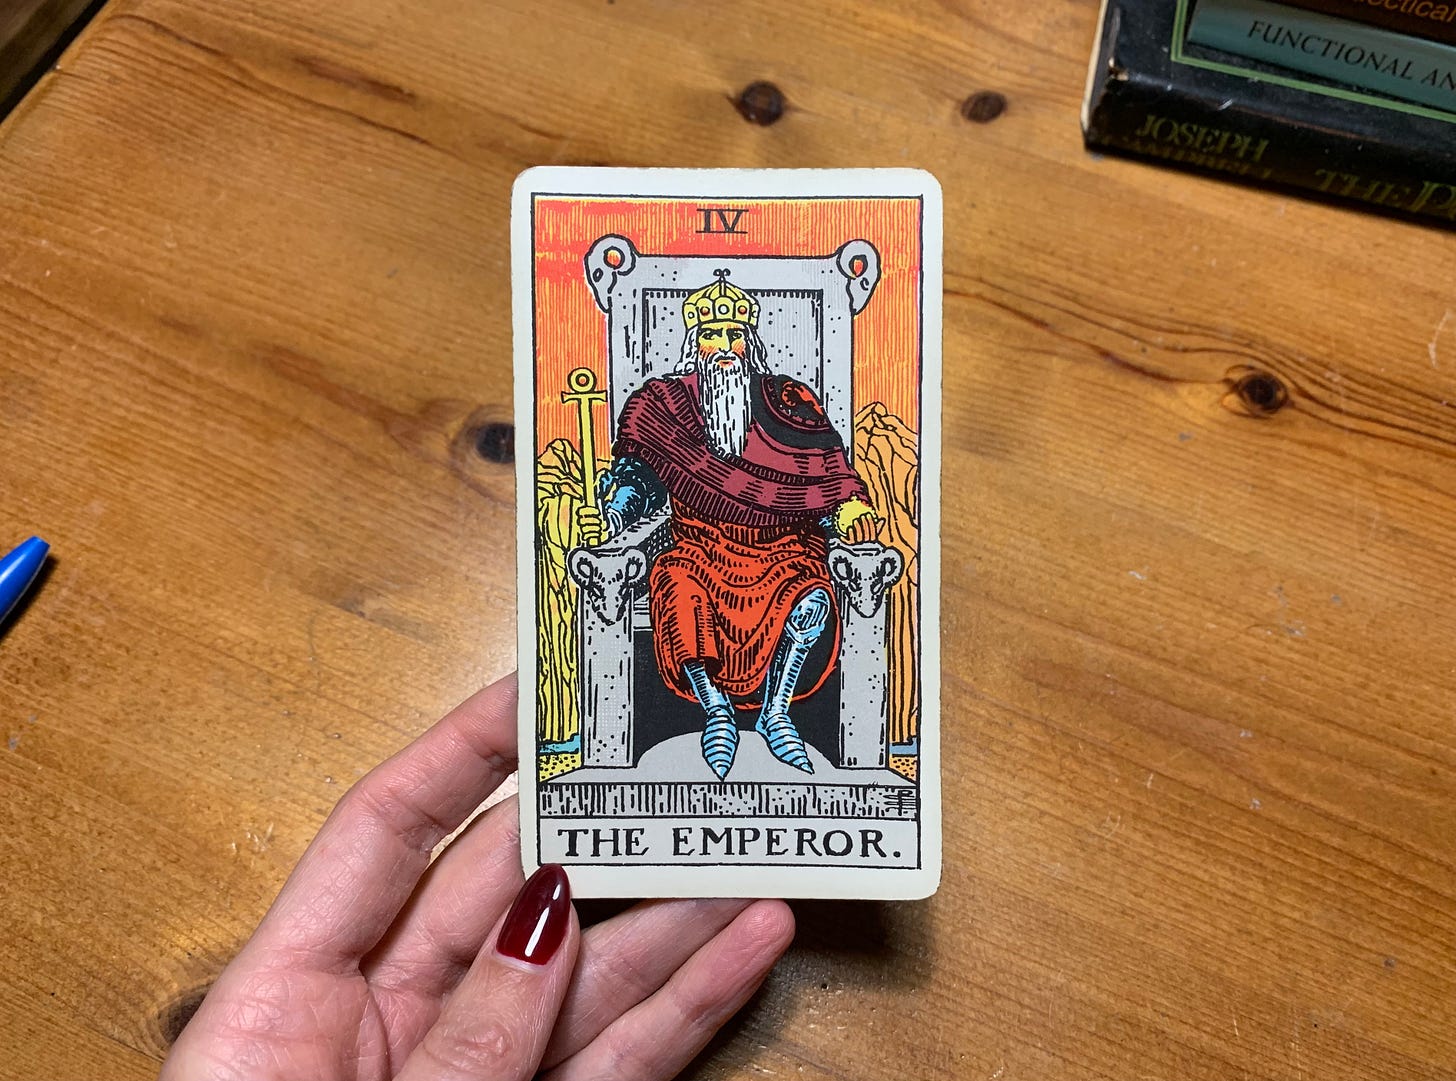 A hand is holding a Tarot card, The Emperor by Pamela Colman Smith. In the image, a person is wearing all red with armor underneath. He is wearing a crown and sitting on a throne with ram's heads on each corner. There are mountains in the background and a thin river flowing. Behind the card is a wooden desk with books on it and some pens.